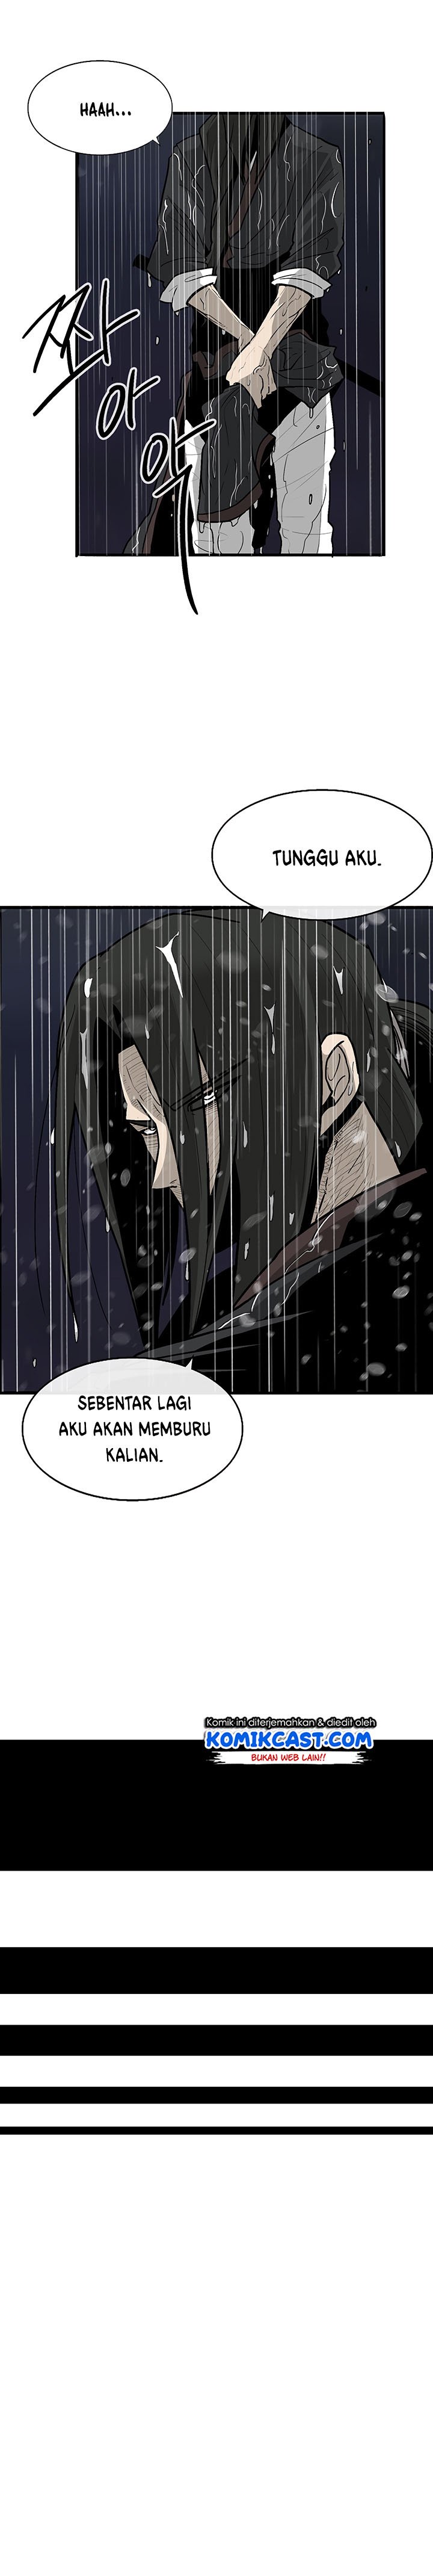 Legend of the Northern Blade Chapter 37